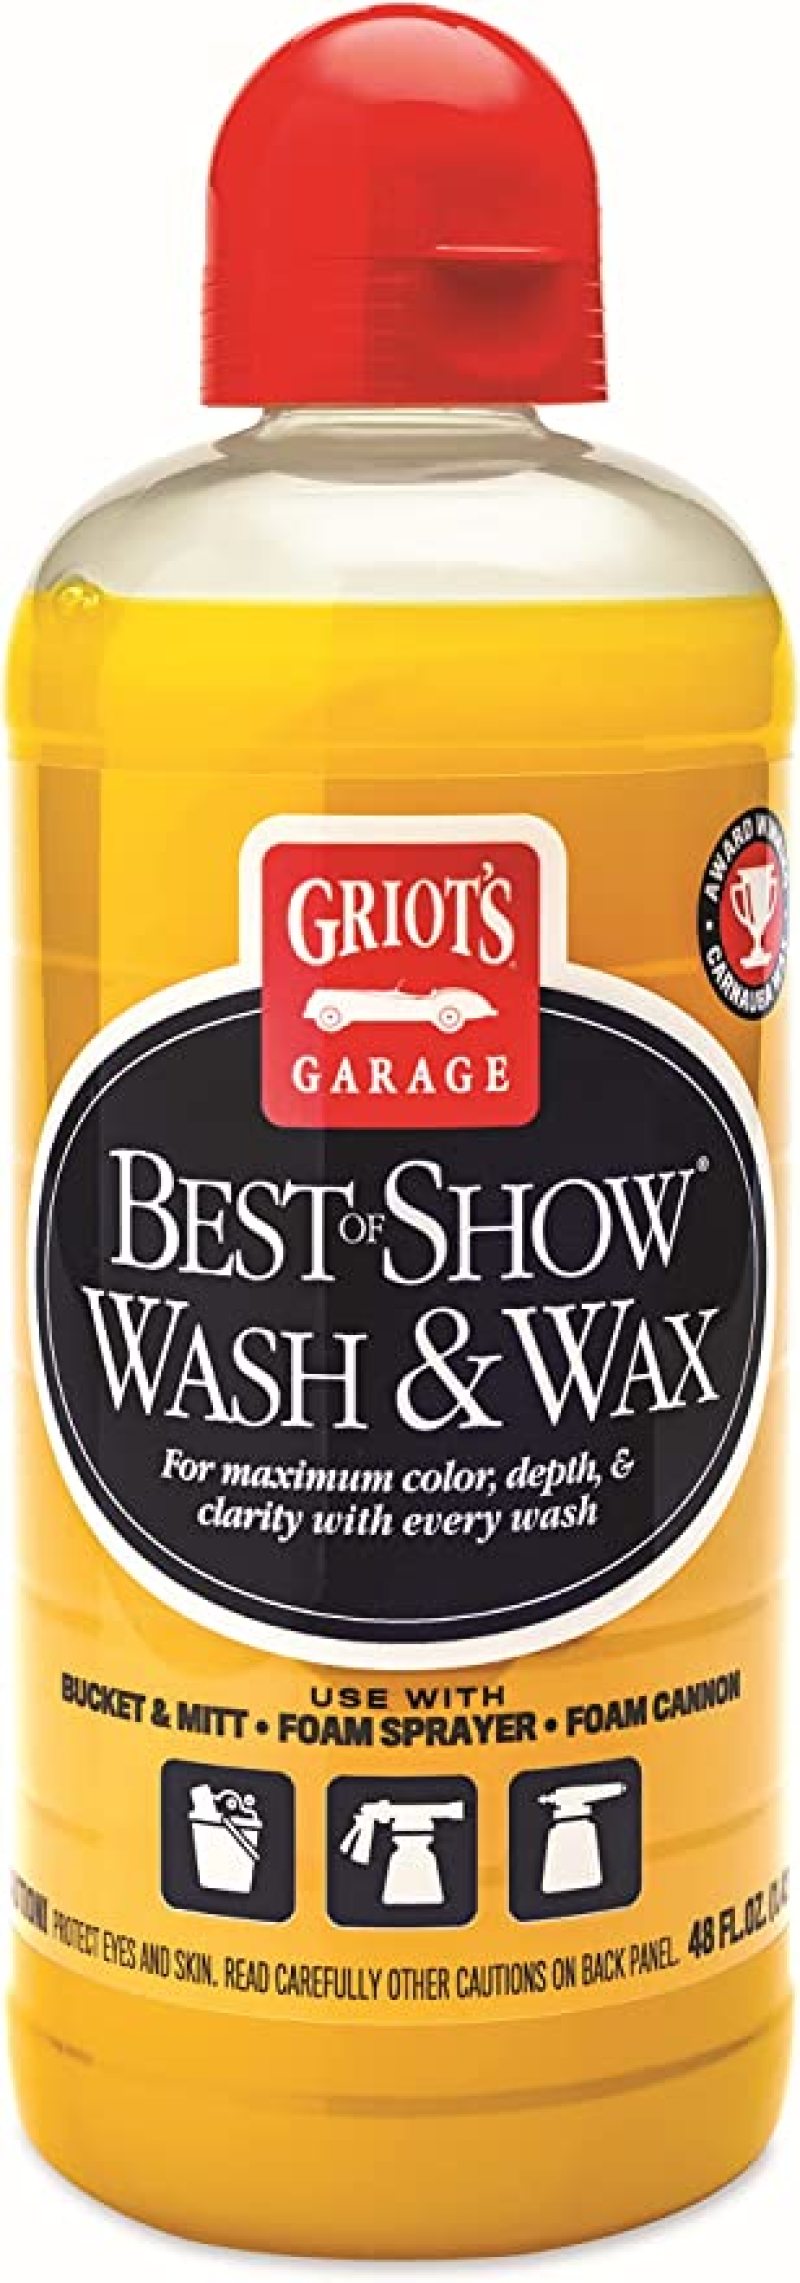 Griots Garage Best of Show Spray Wax - 48oz -  Shop now at Performance Car Parts